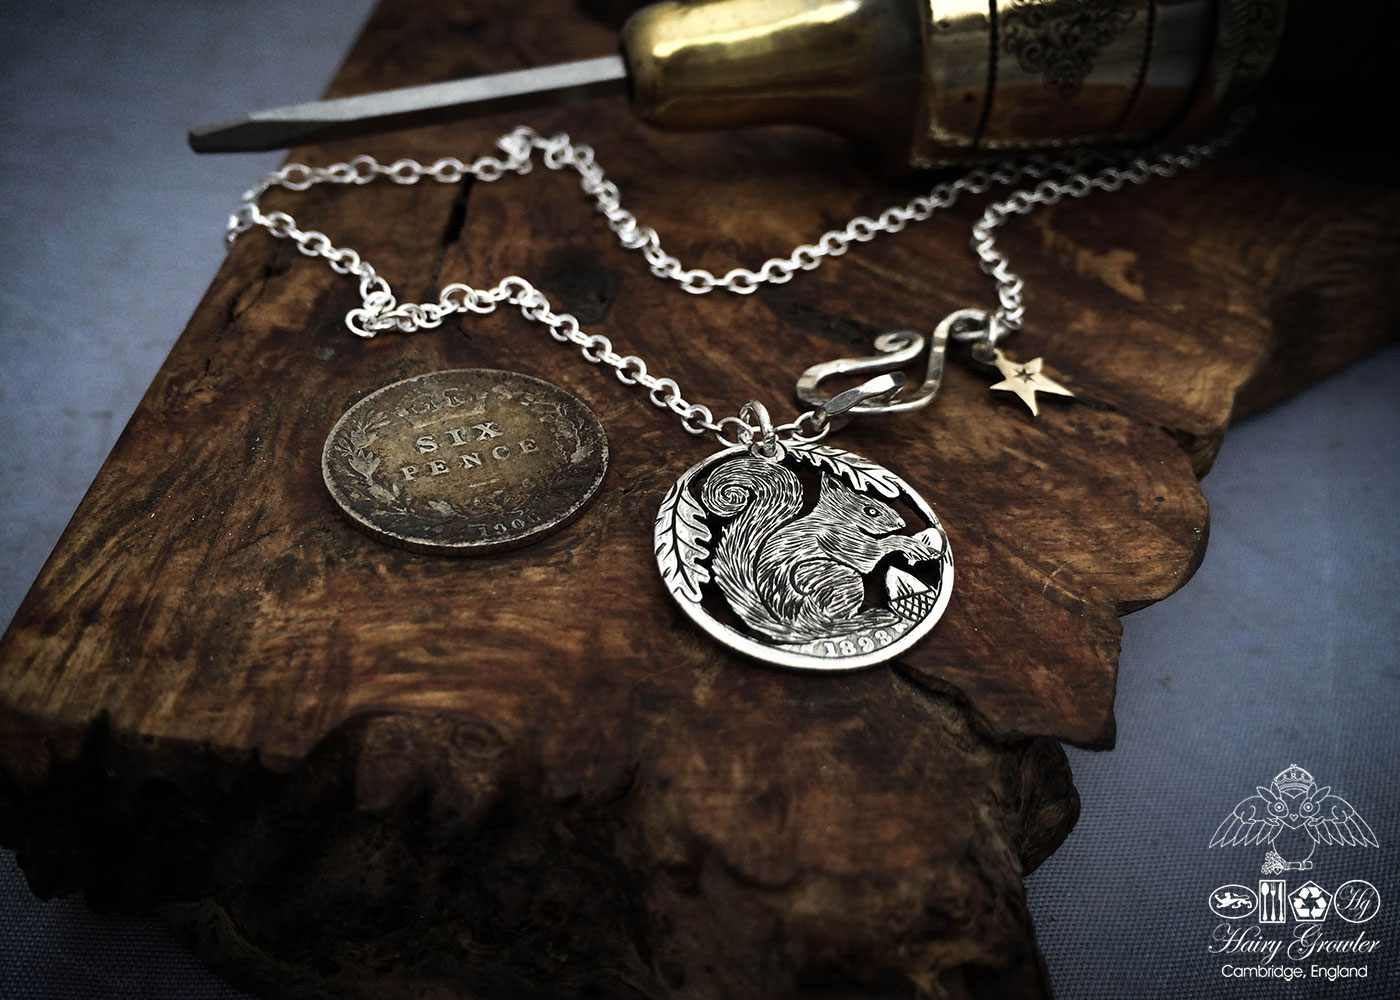 Handmade and repurposed silver sixpence coin squirrel pendant necklace